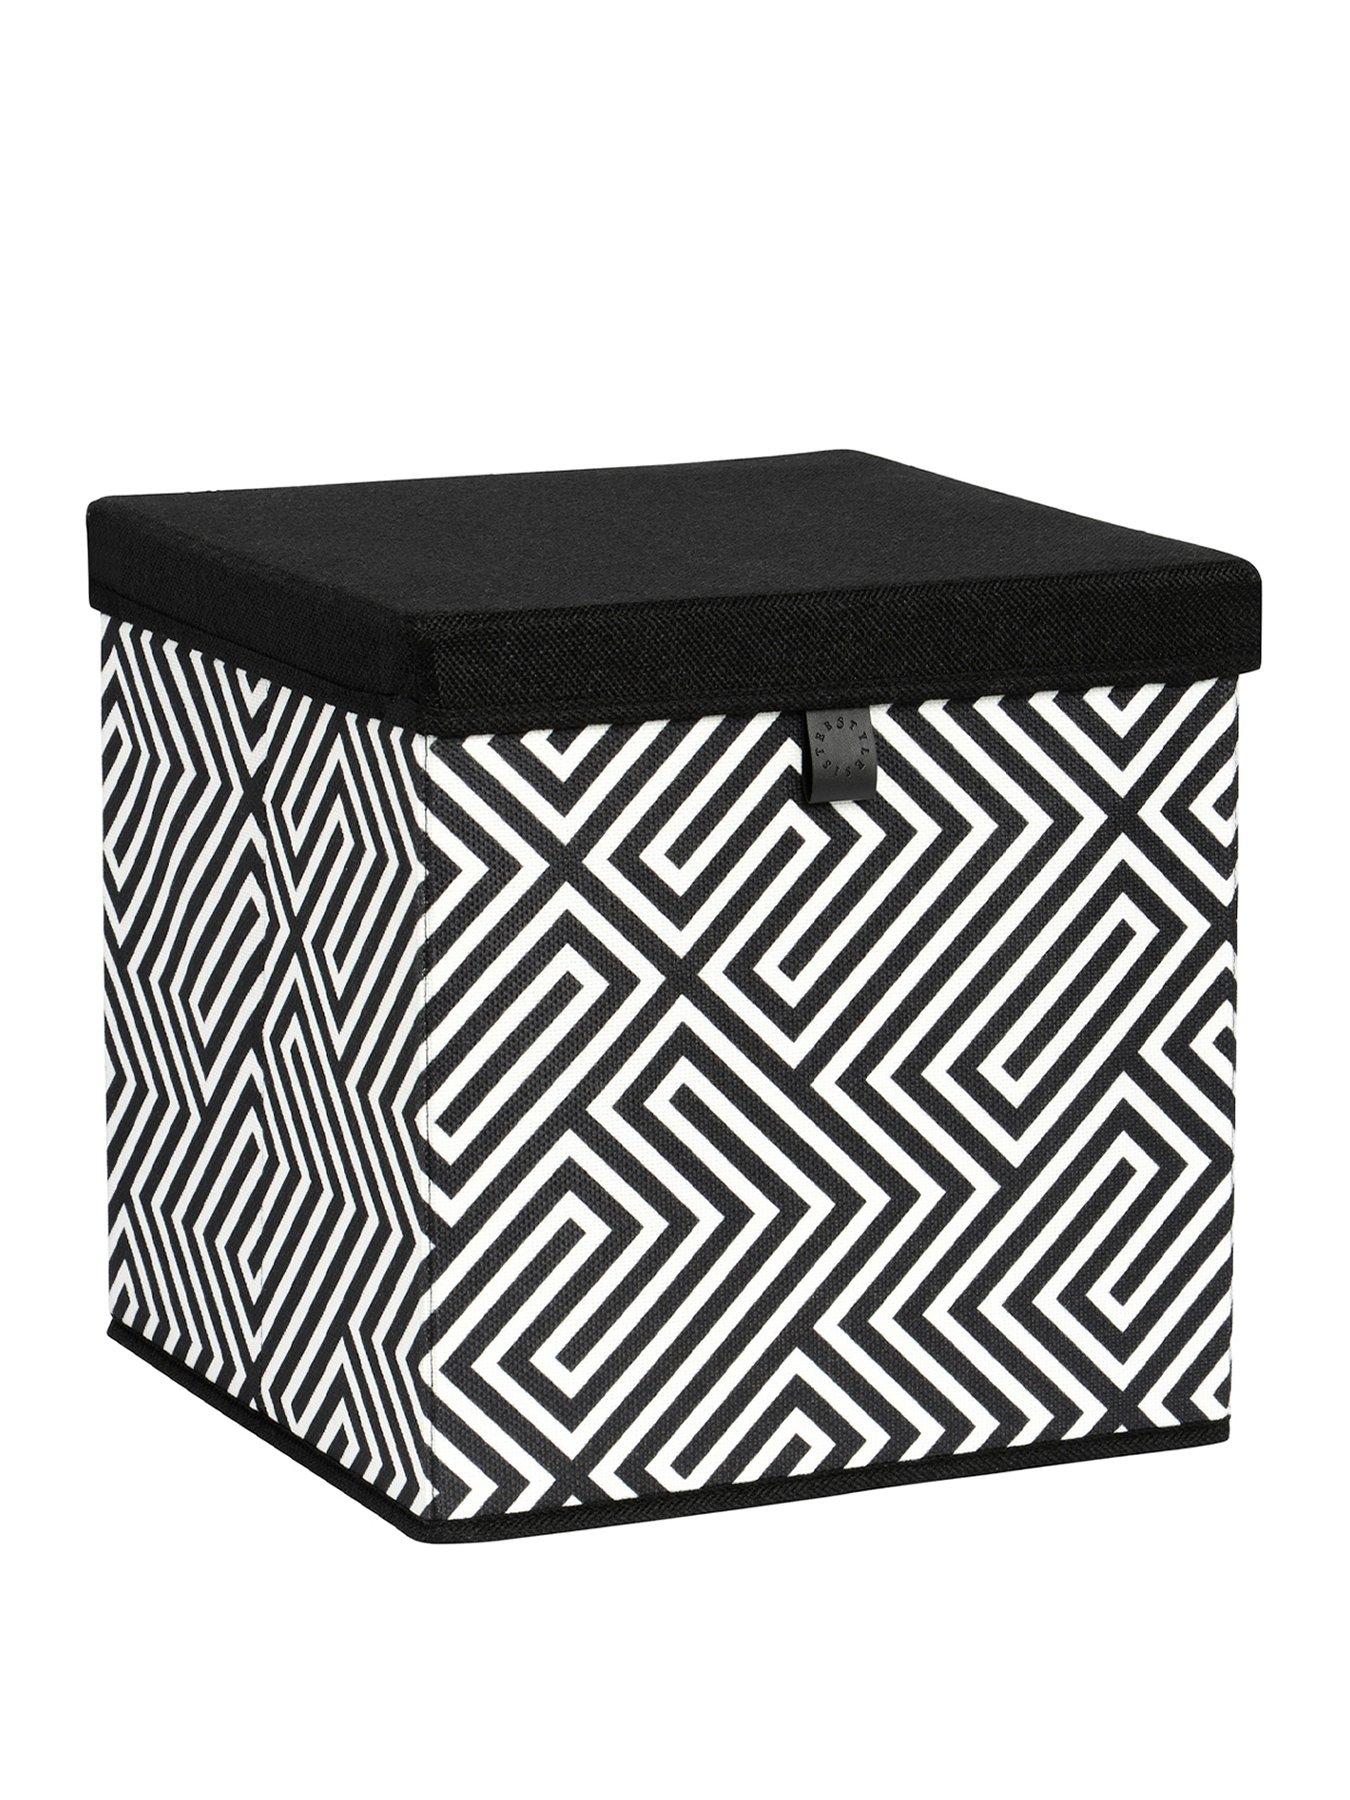 Style Sisters Foldable Storage Box | littlewoods.com